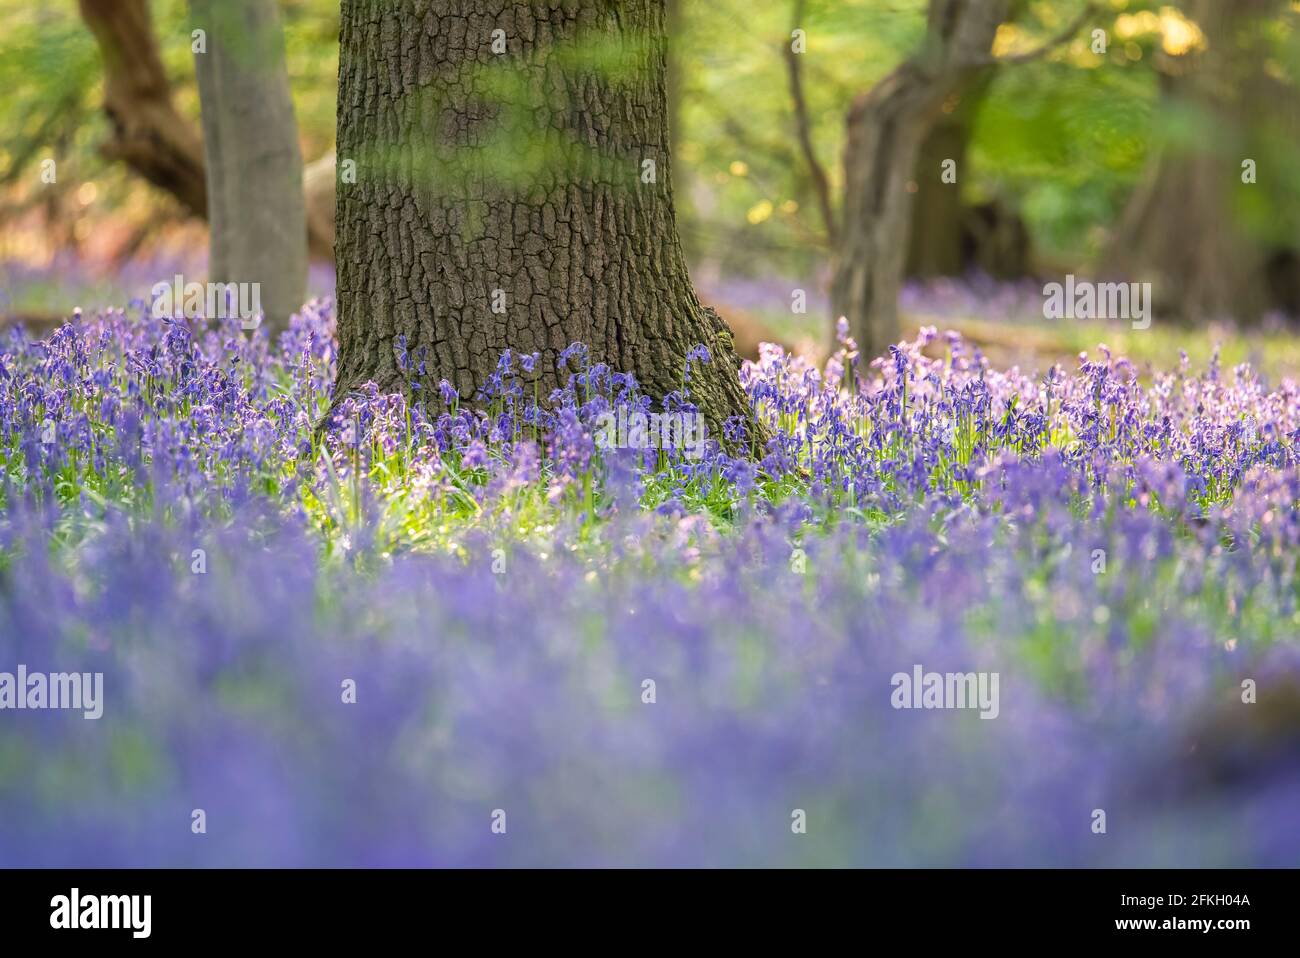 A tree in the forest surrounded by bluebells Stock Photo